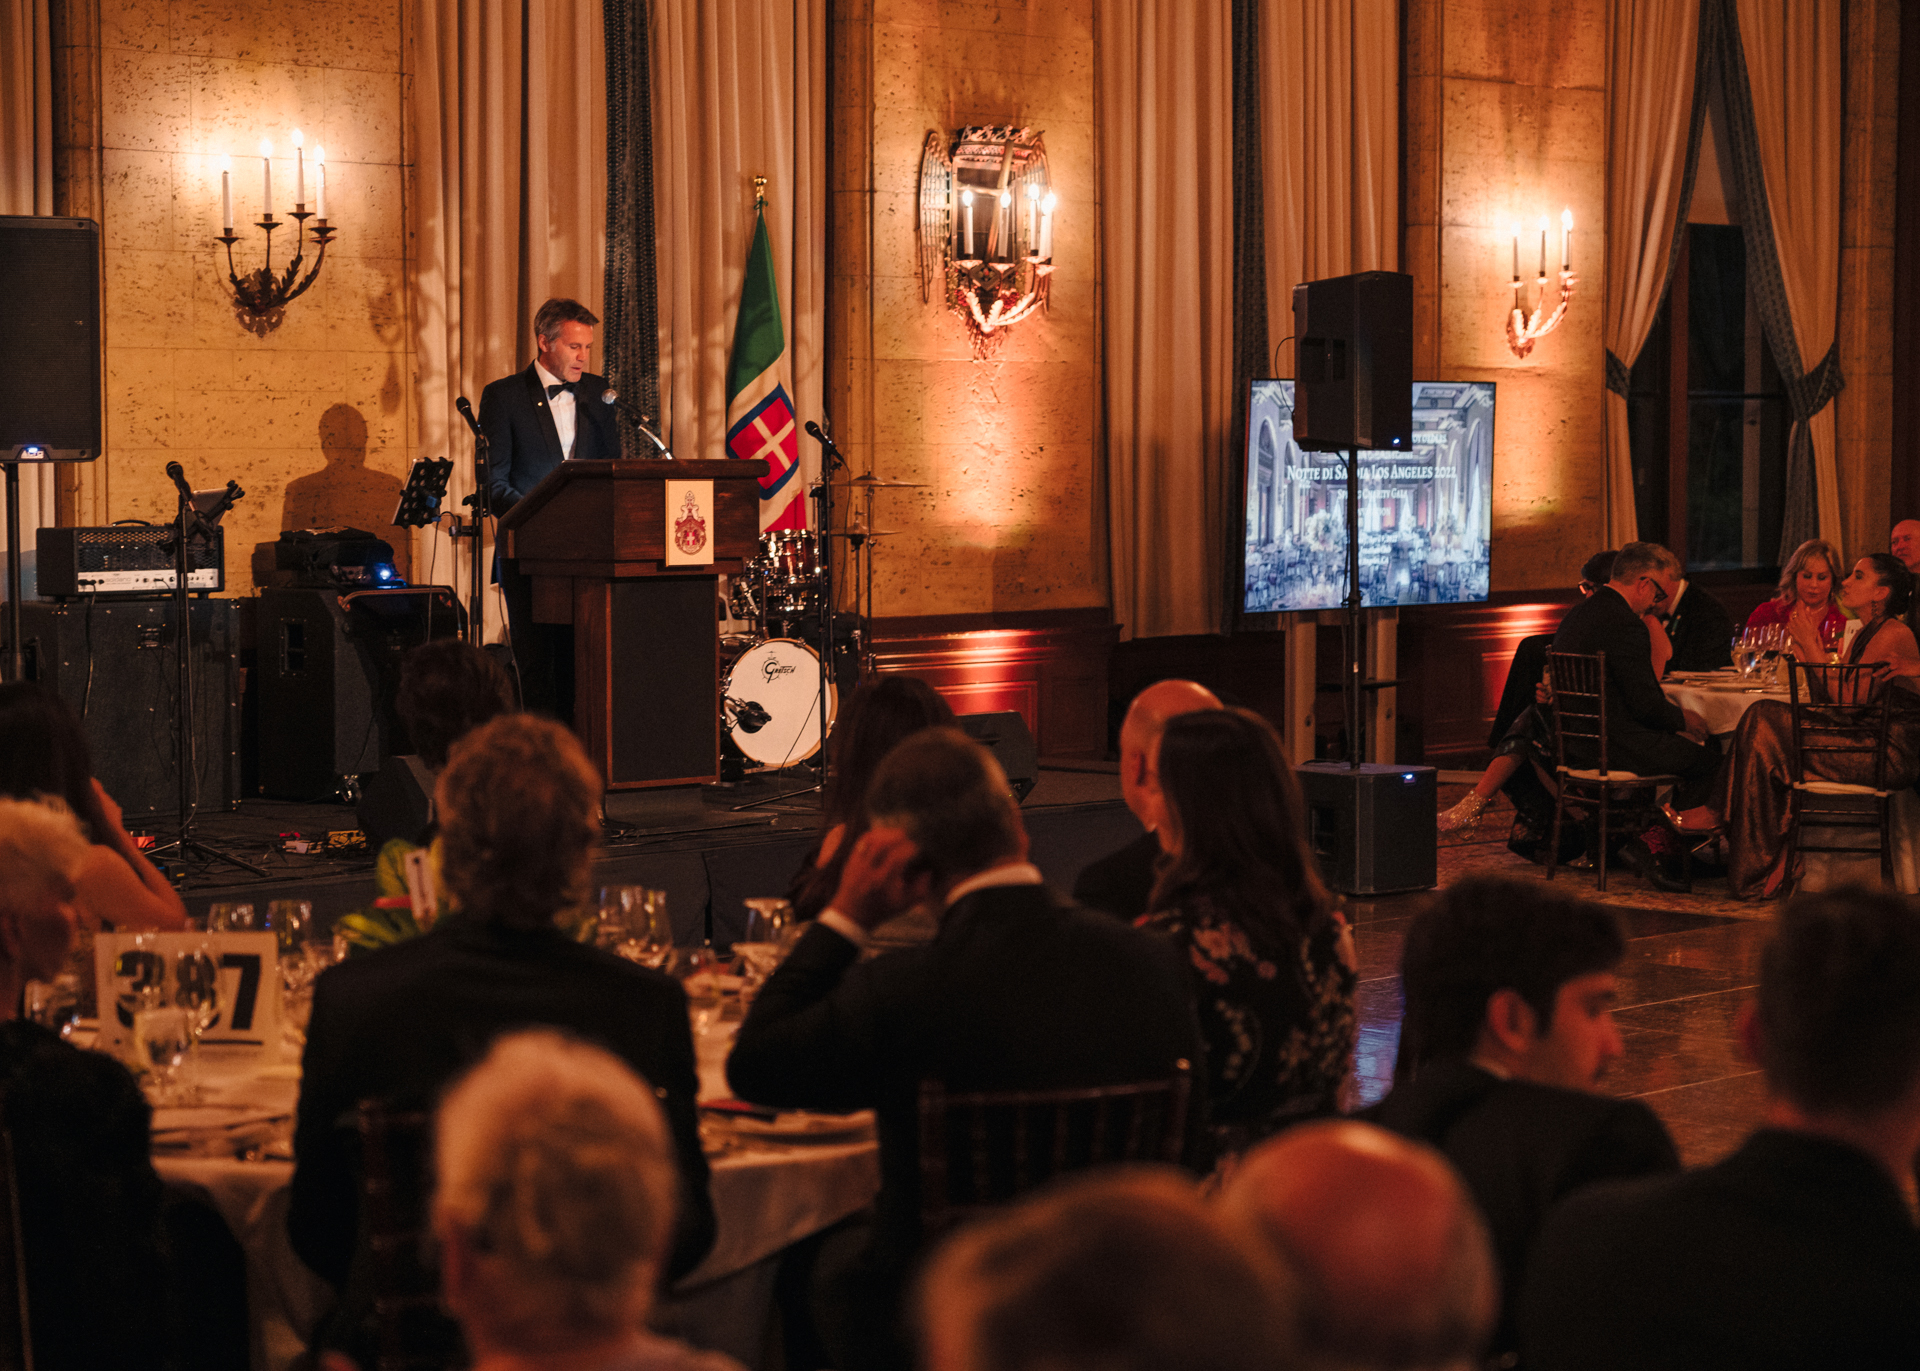 HRH Prince Emmanuel Philibert of Savoy, Guest of Honor, Welcomes Attendees at the Annual Notte di Savoia in Los Angeles, April 9, 2022